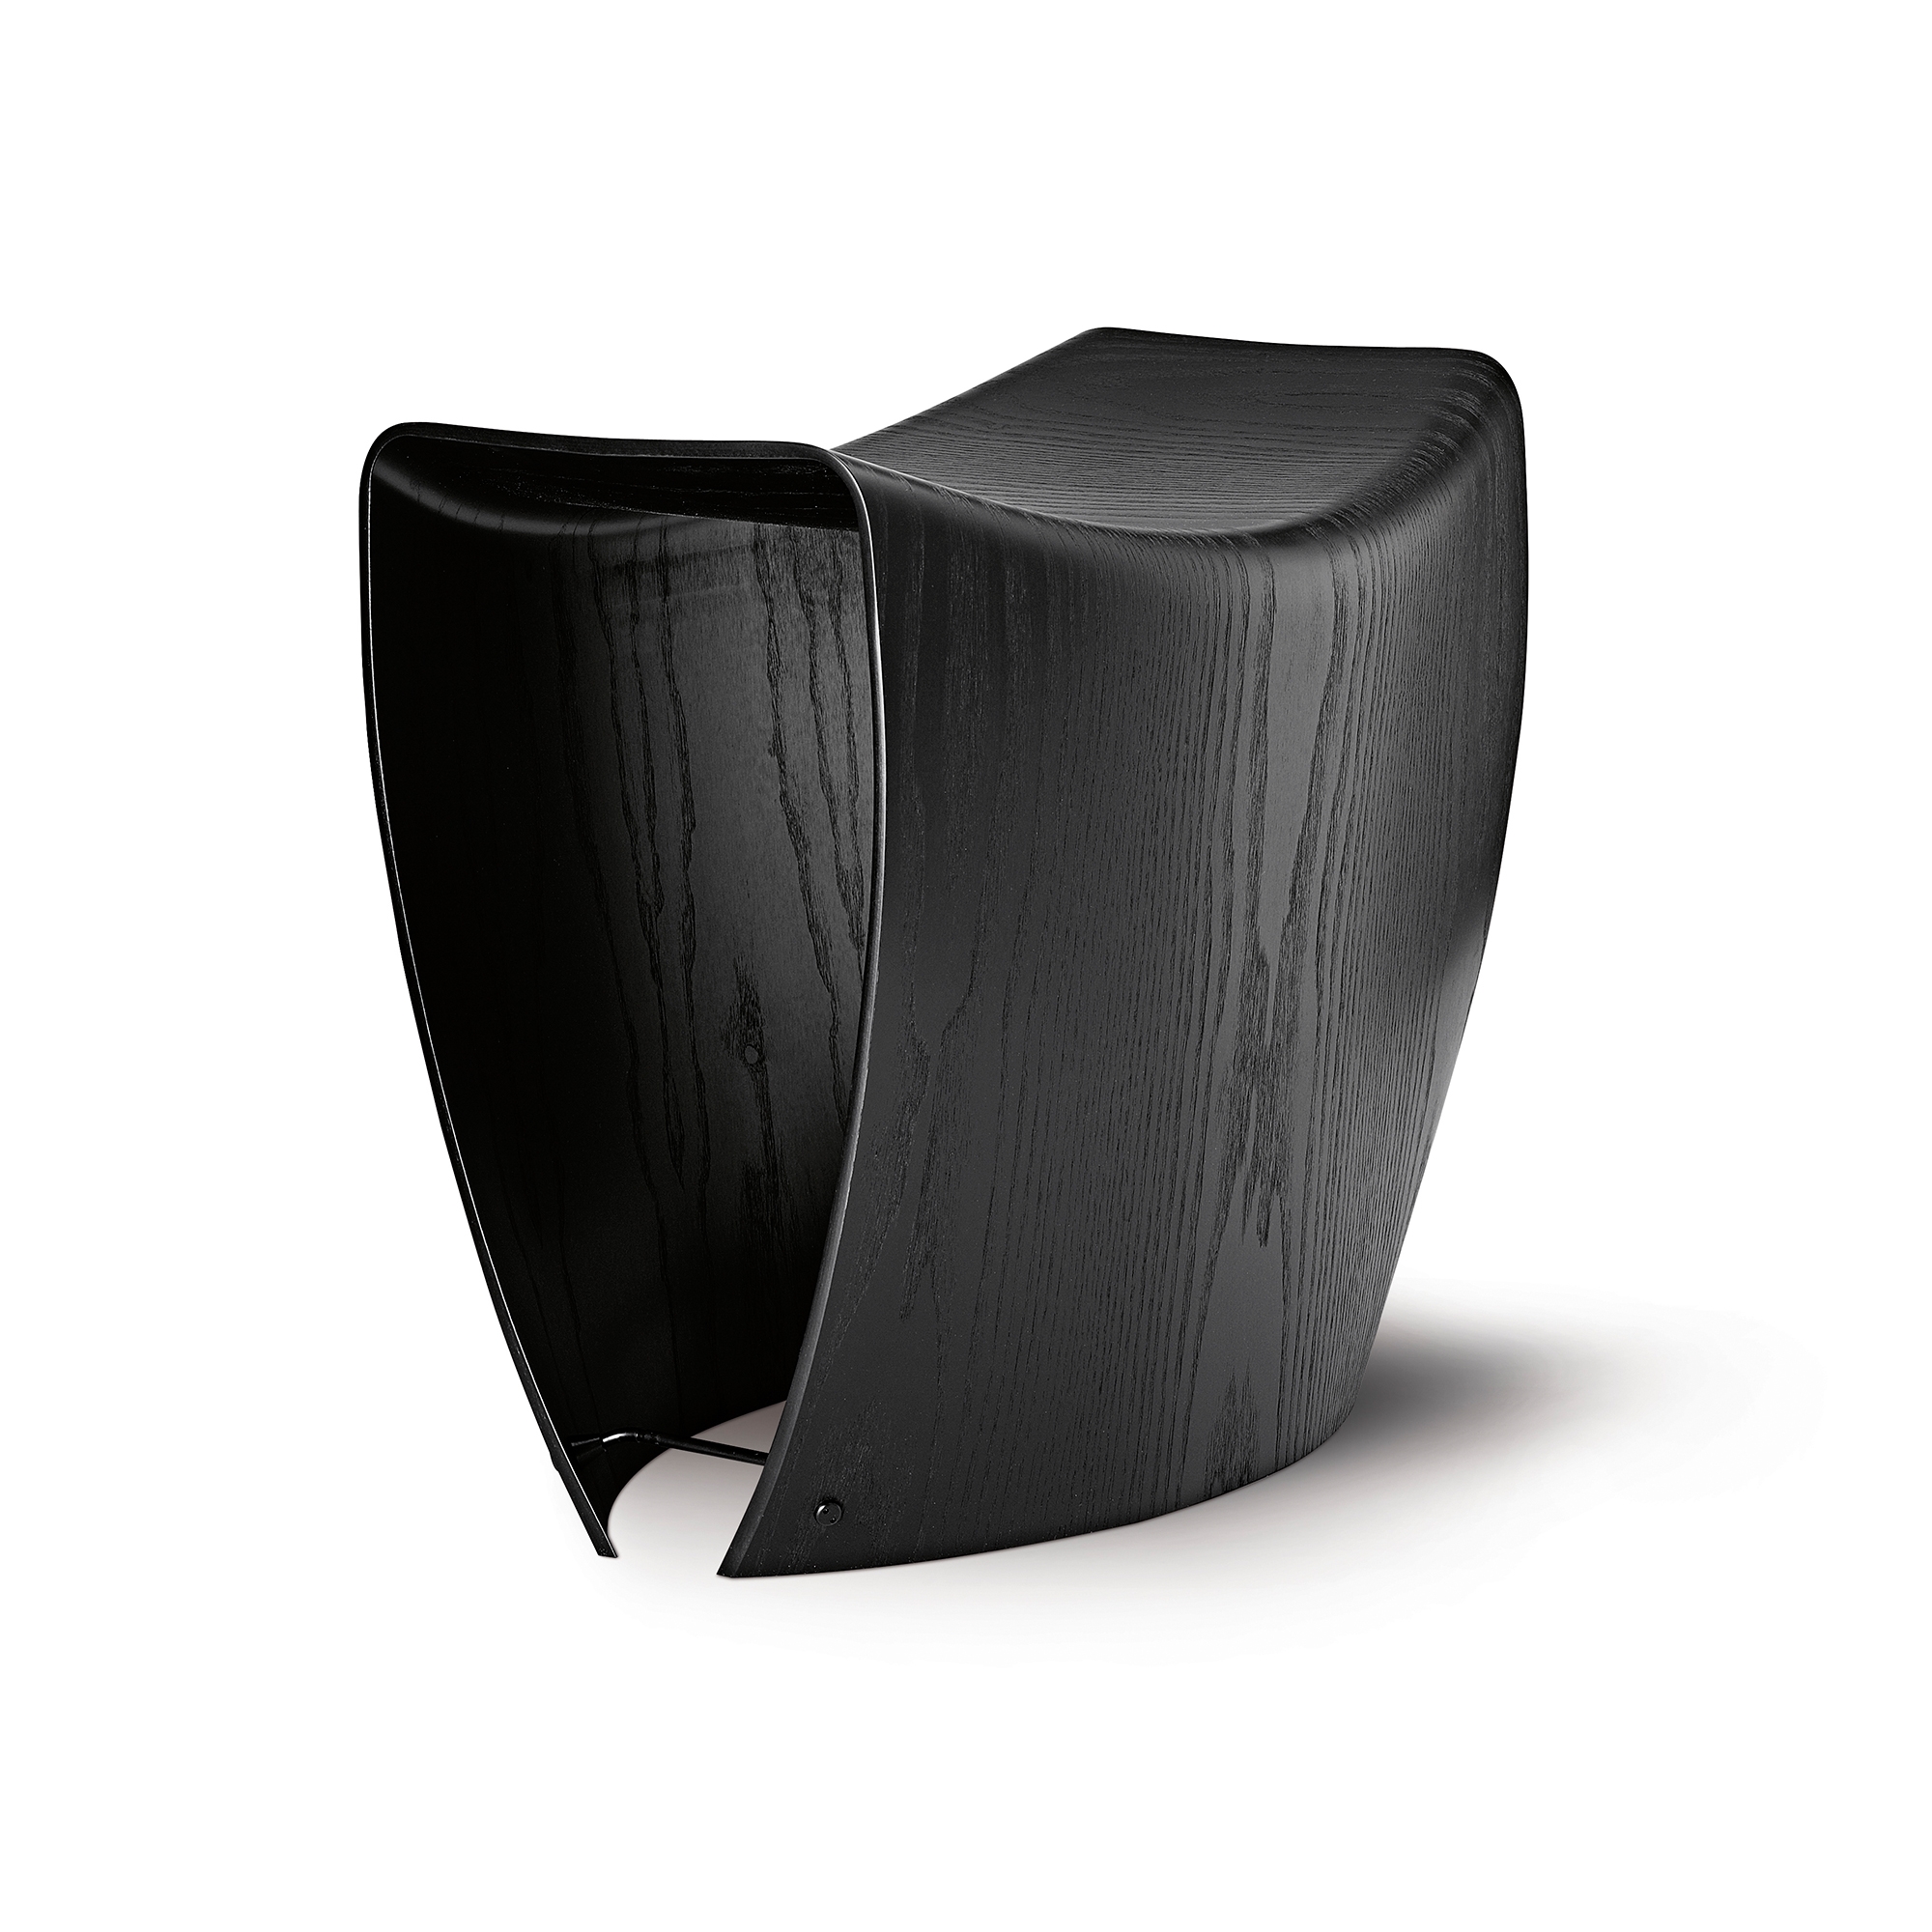 Fredericia Furniture Gallery Stool Black Lacquered Oak